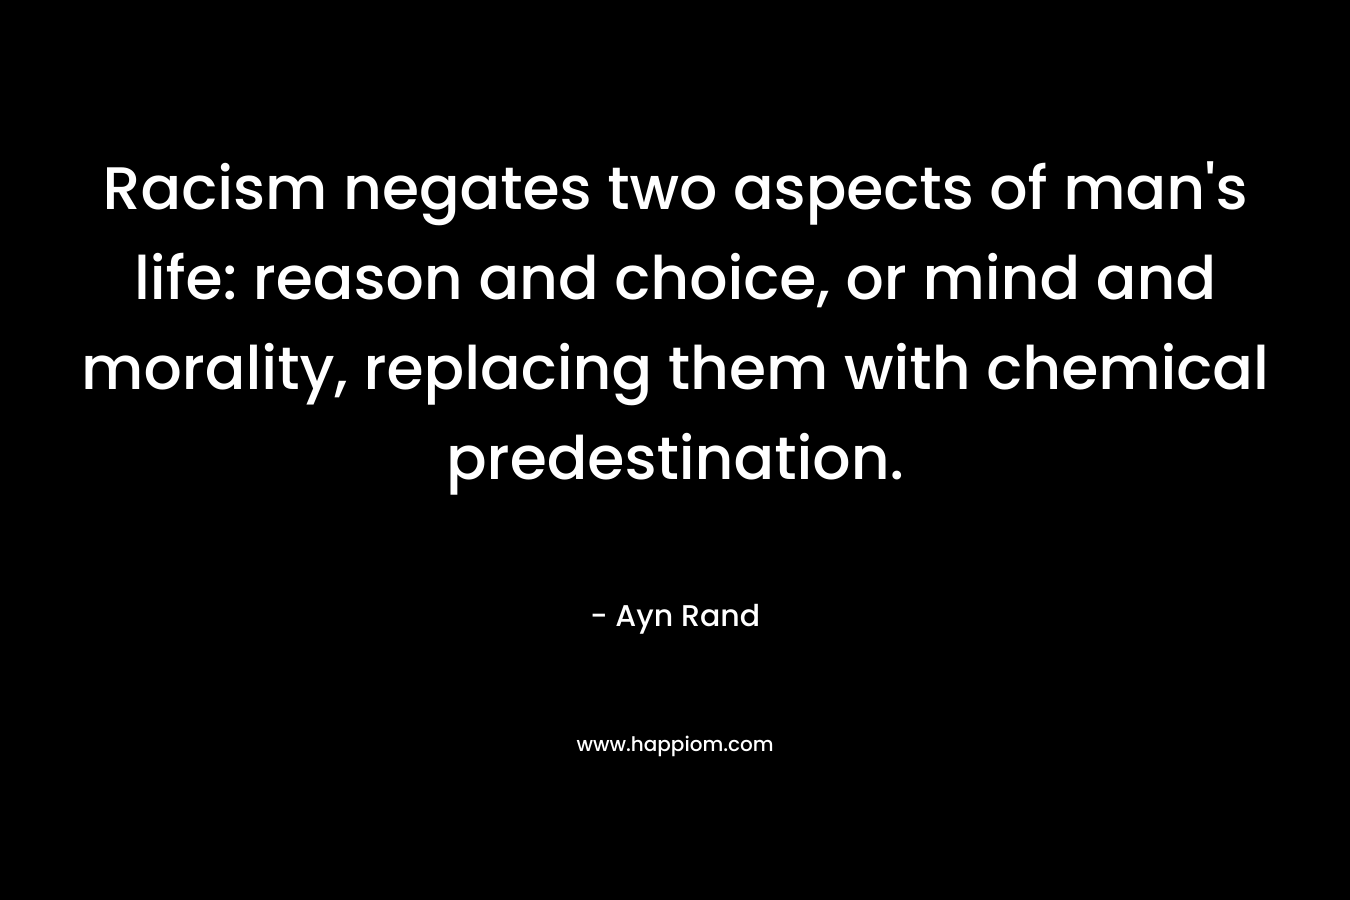 Racism negates two aspects of man’s life: reason and choice, or mind and morality, replacing them with chemical predestination. – Ayn Rand